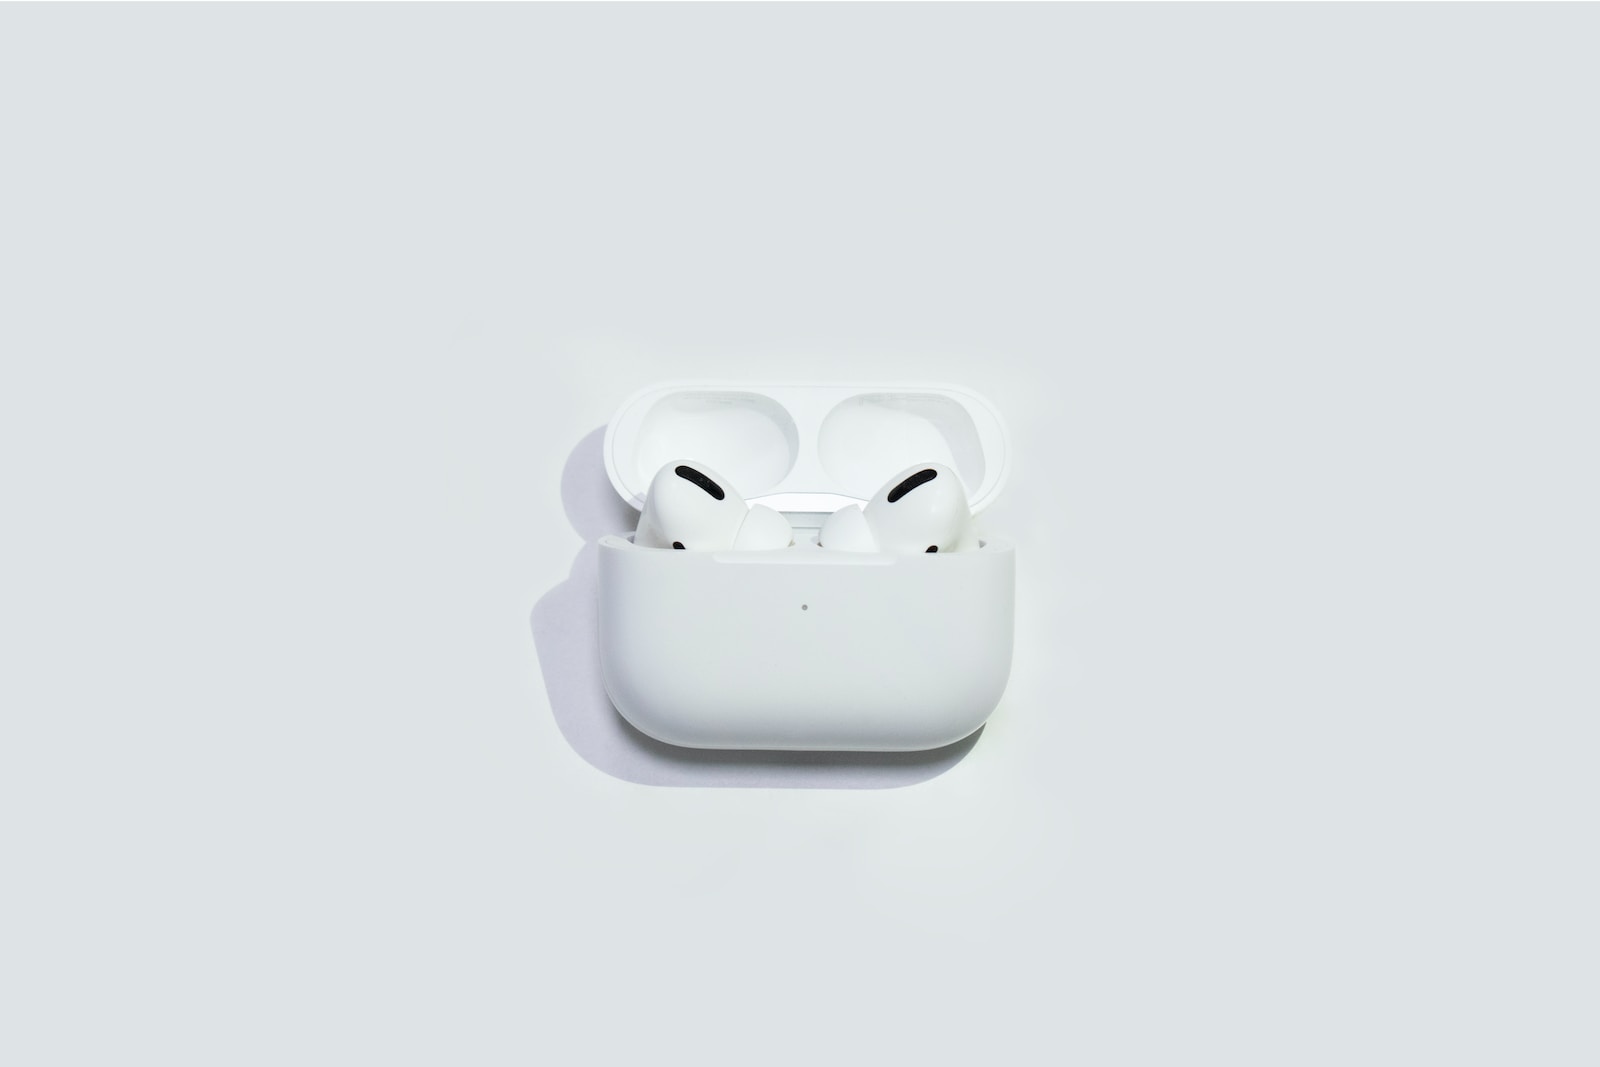 can airpods overheat?